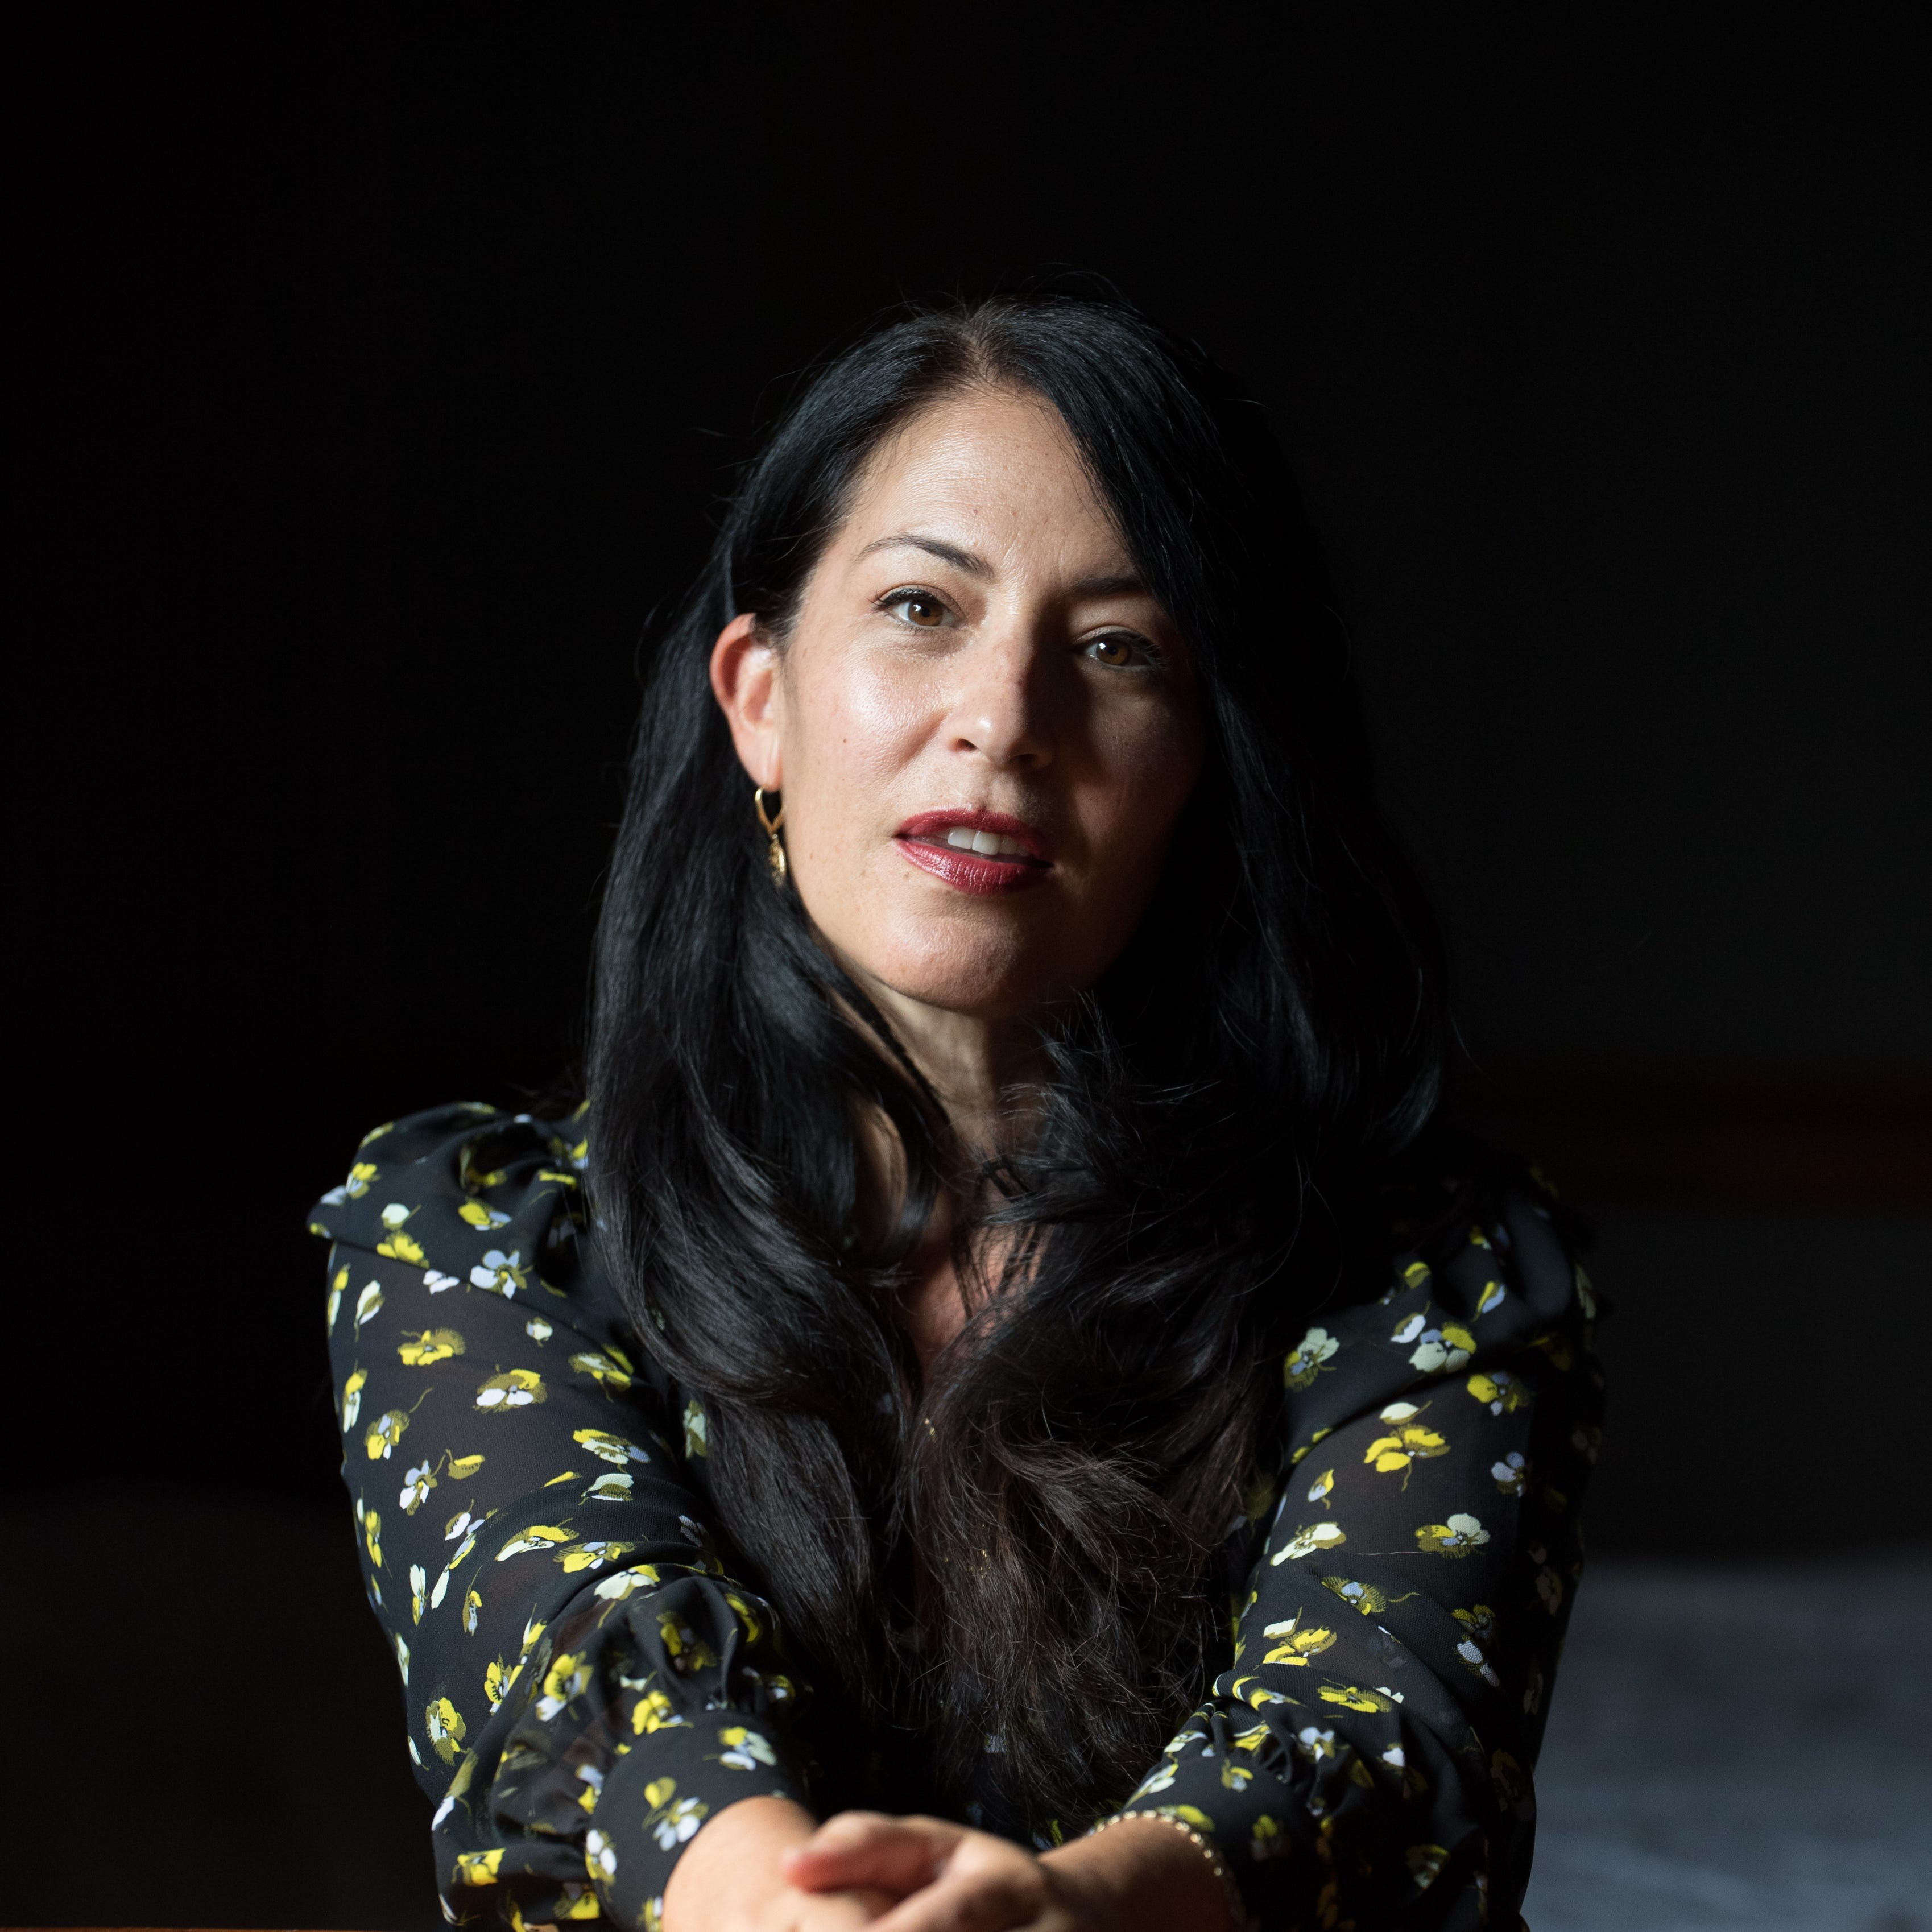 Ada Limón, the 24th Poet Laureate of the United States